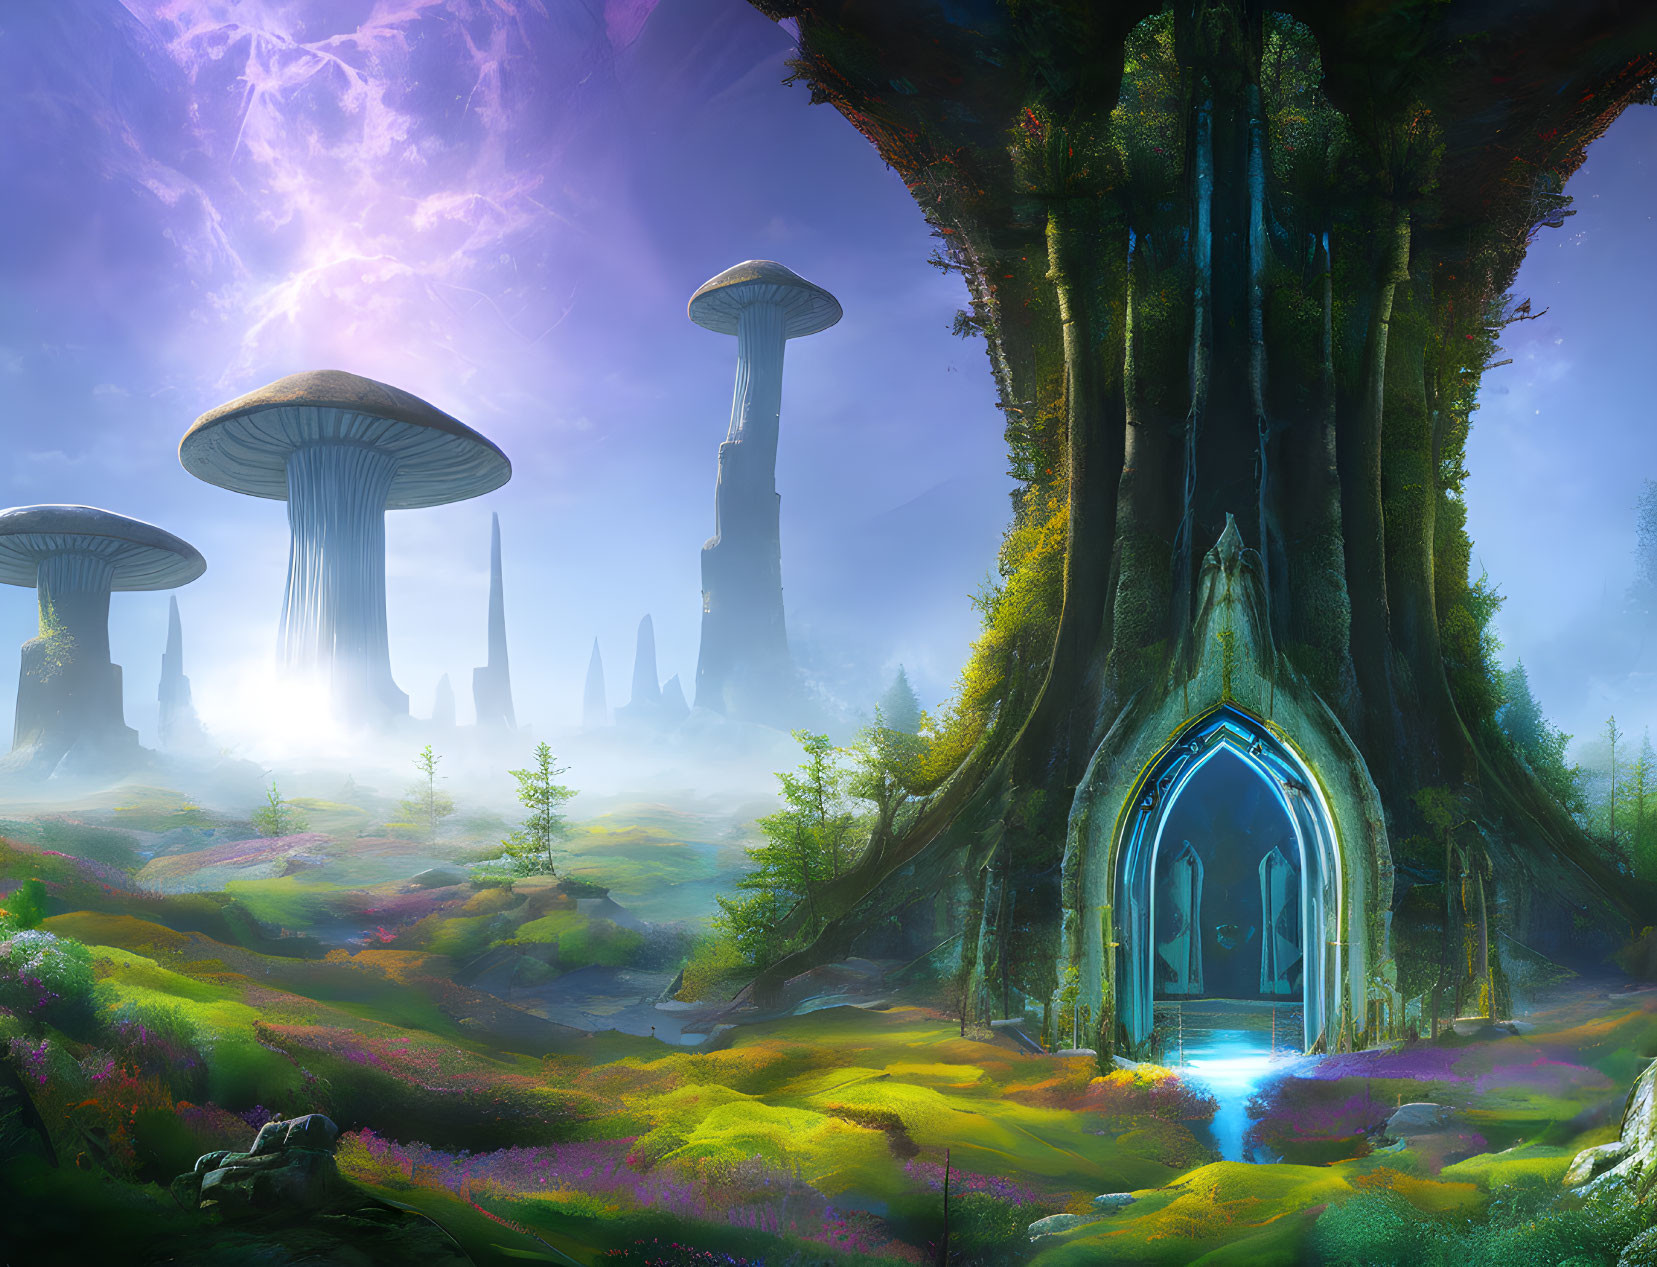 Fantastical landscape with giant tree, arched doorway, oversized mushrooms, and vibrant terrain